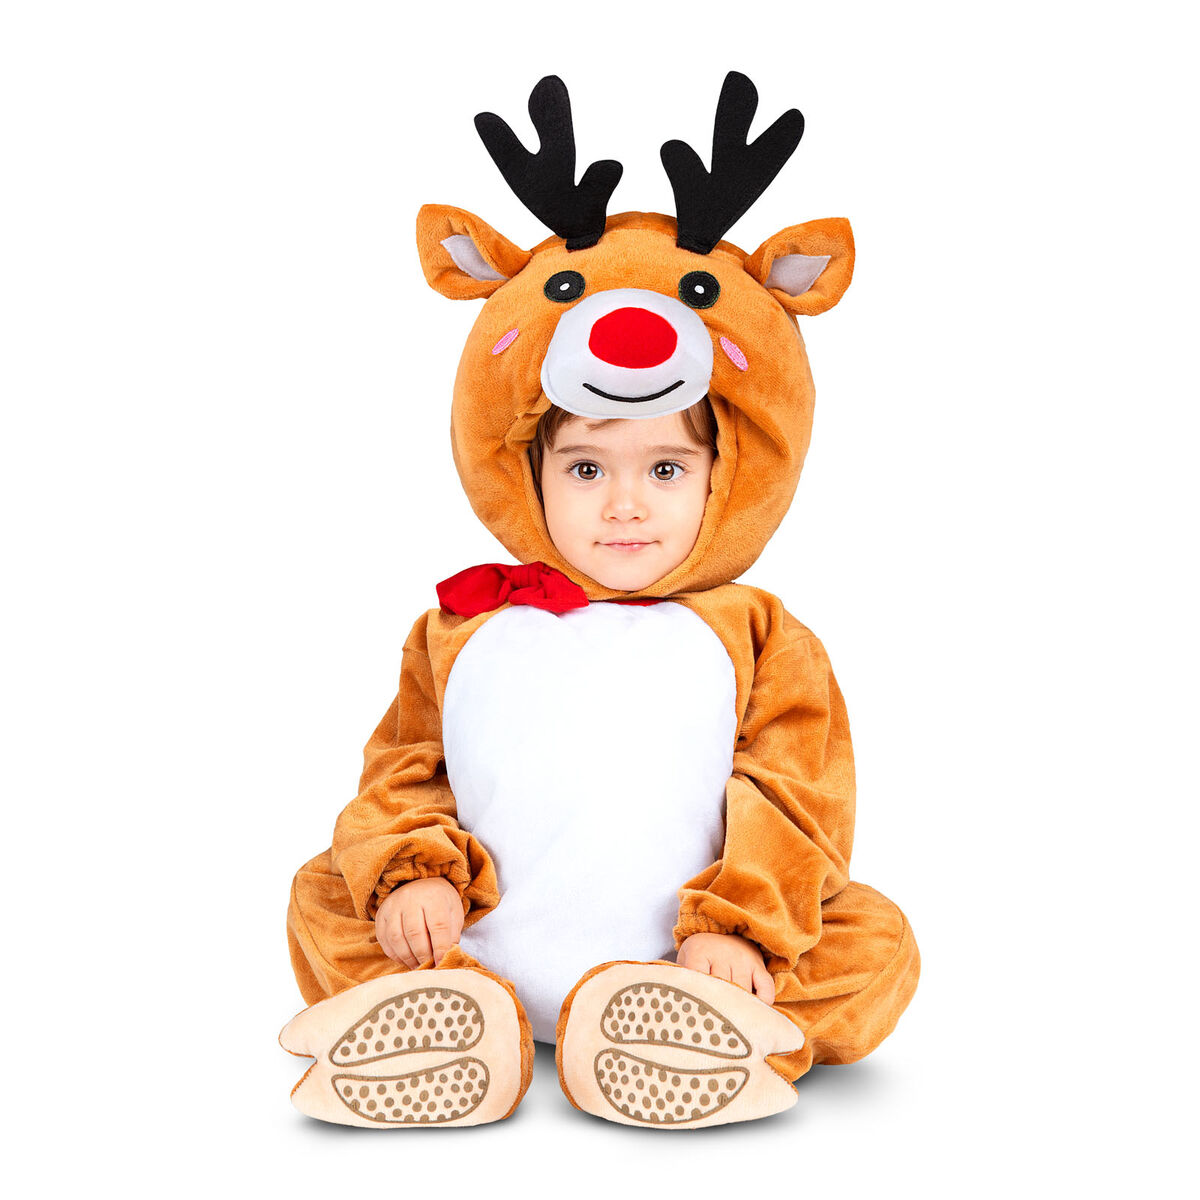 Costume for Babies My Other Me Reindeer (4 Pieces)